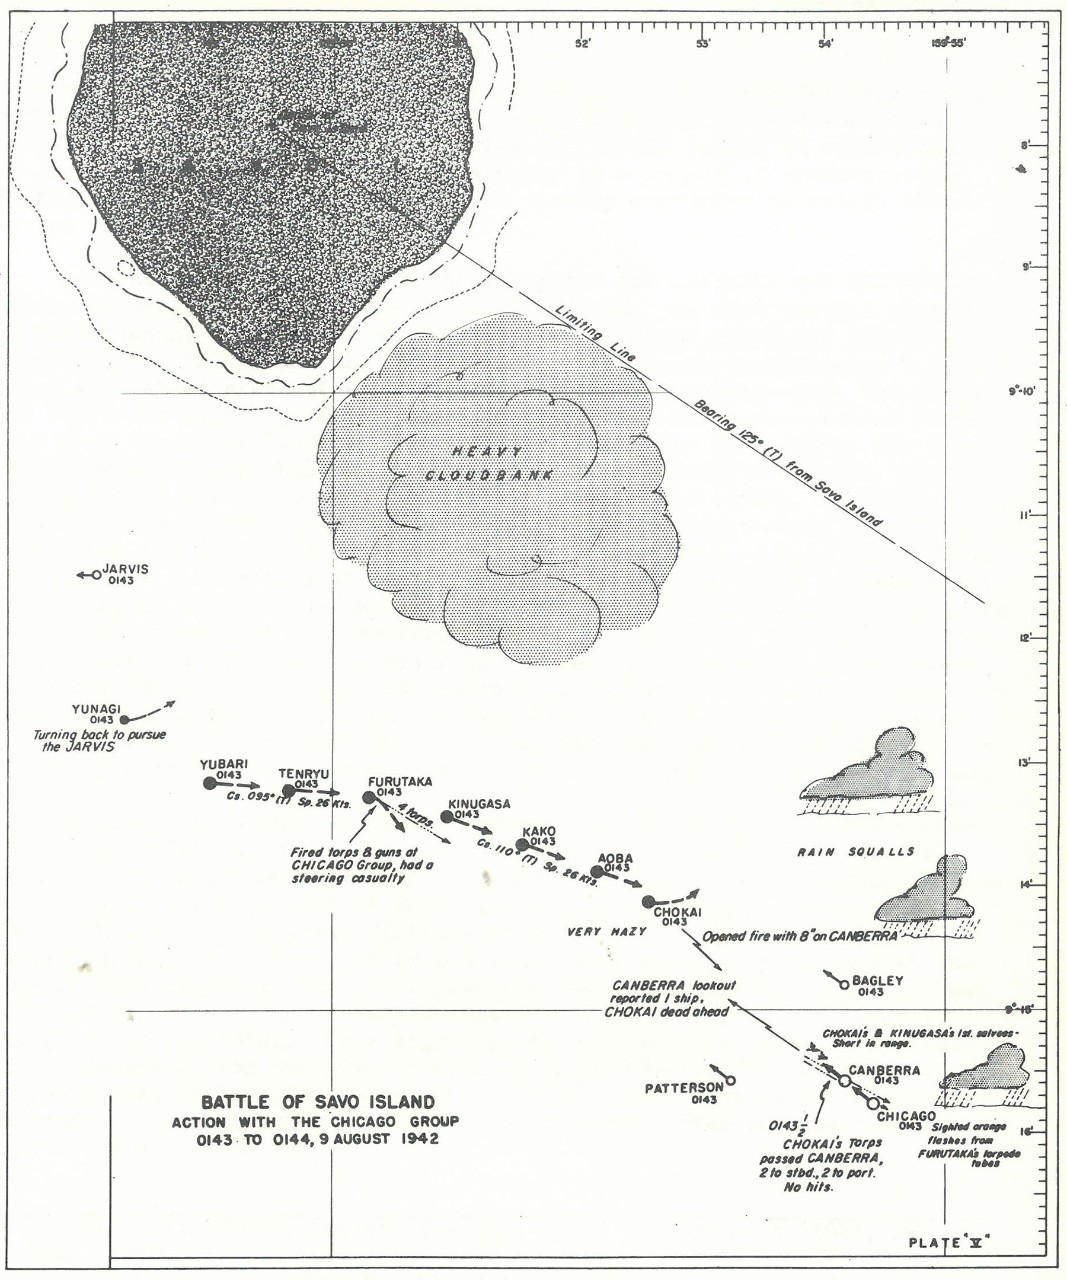 Plate 5: Battle of Savo Island, Action with the CHICAGO Group, 0143 to 0144, 9 August 1942 - chart - The Battle of Savo Island August 9, 1942 Strategical and Tactical Analysis